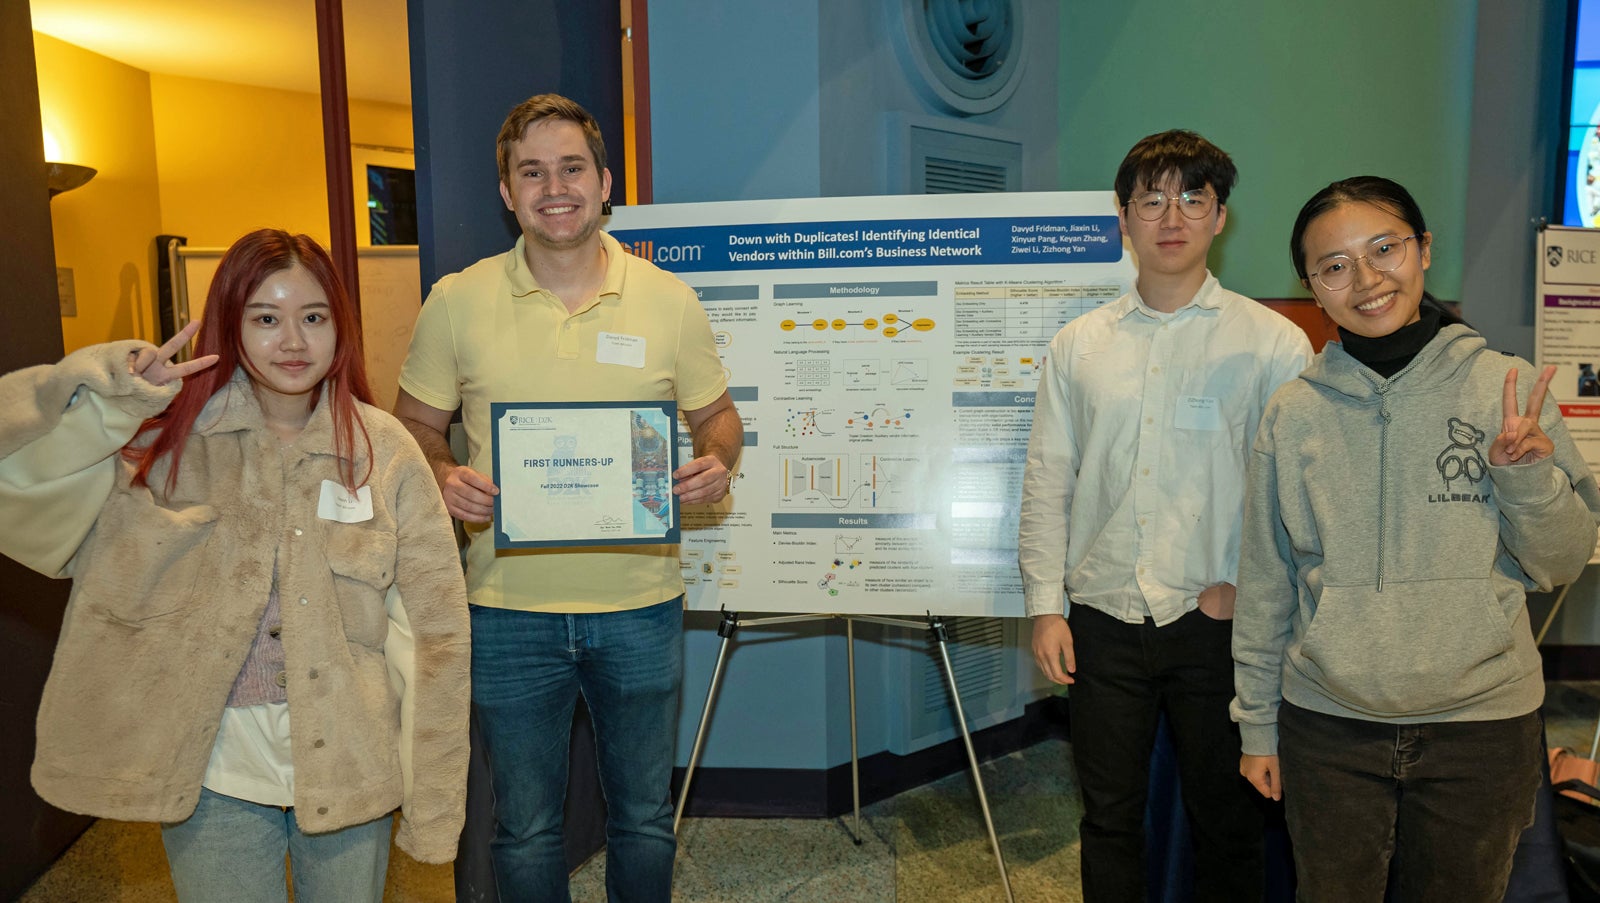 Photo caption: The Bill.com student team Jiaxin Li  (left), Davyd Fridman, ZiZhong Yan, and Ziwei “Jenny” Li, plus Keyan Zhang and Xinyue “Kaylee” Pang (not pictured) helped their sponsor identify duplicate vendor records based on transaction invoices and other accounting data.